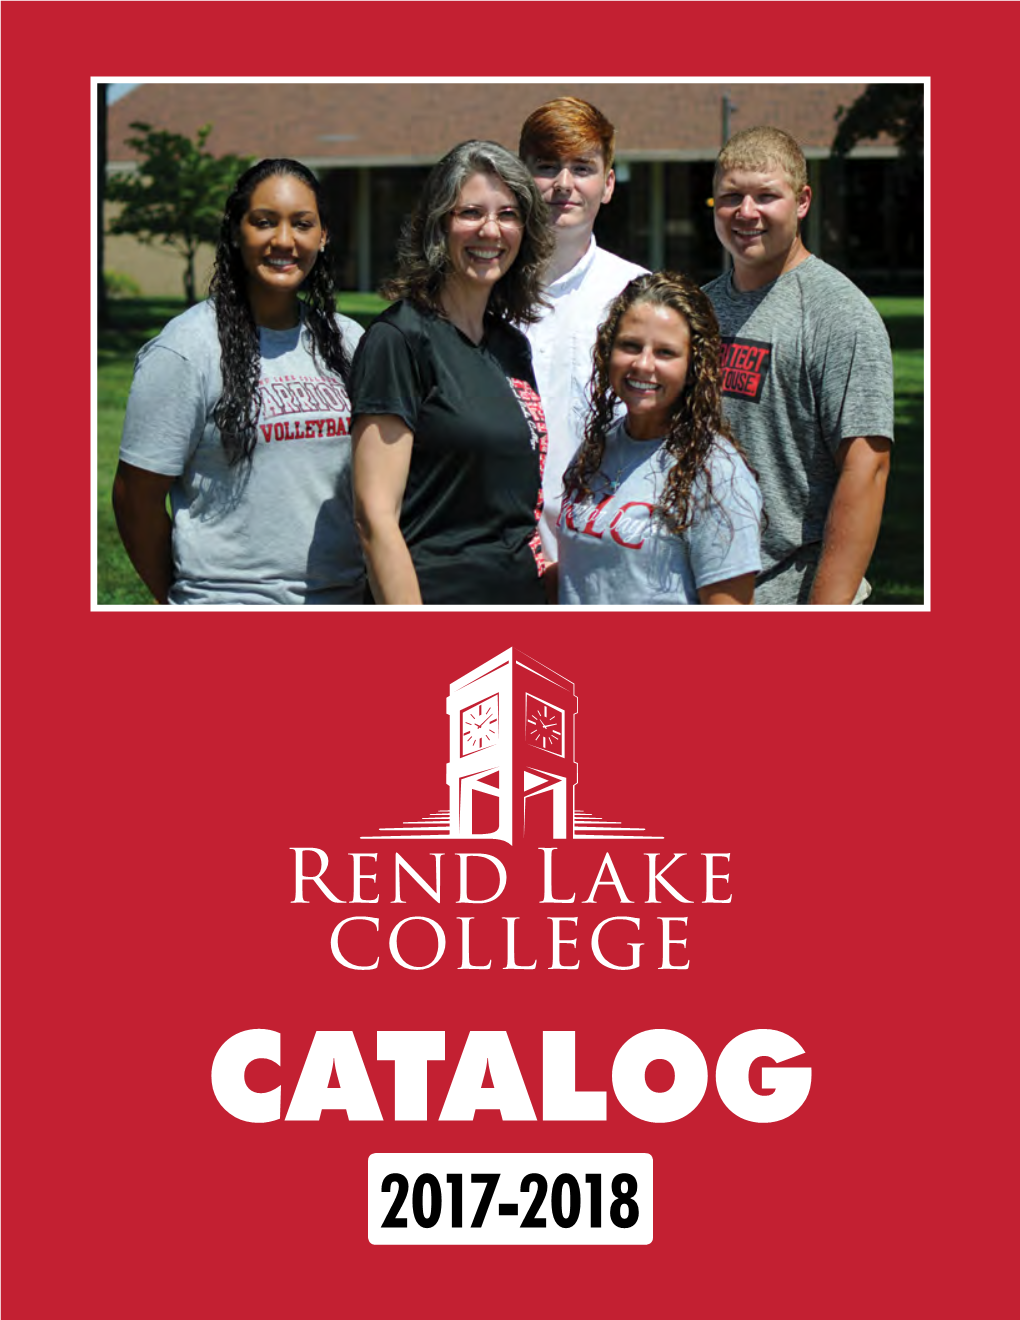 2017-2018 Rend Lake College 468 N Ken Gray Pkwy Ina, IL 62846 Telephone 618.437.5321 Toll-Free (In-District Only) 1.800.369.5321 Fax 618.437.5677